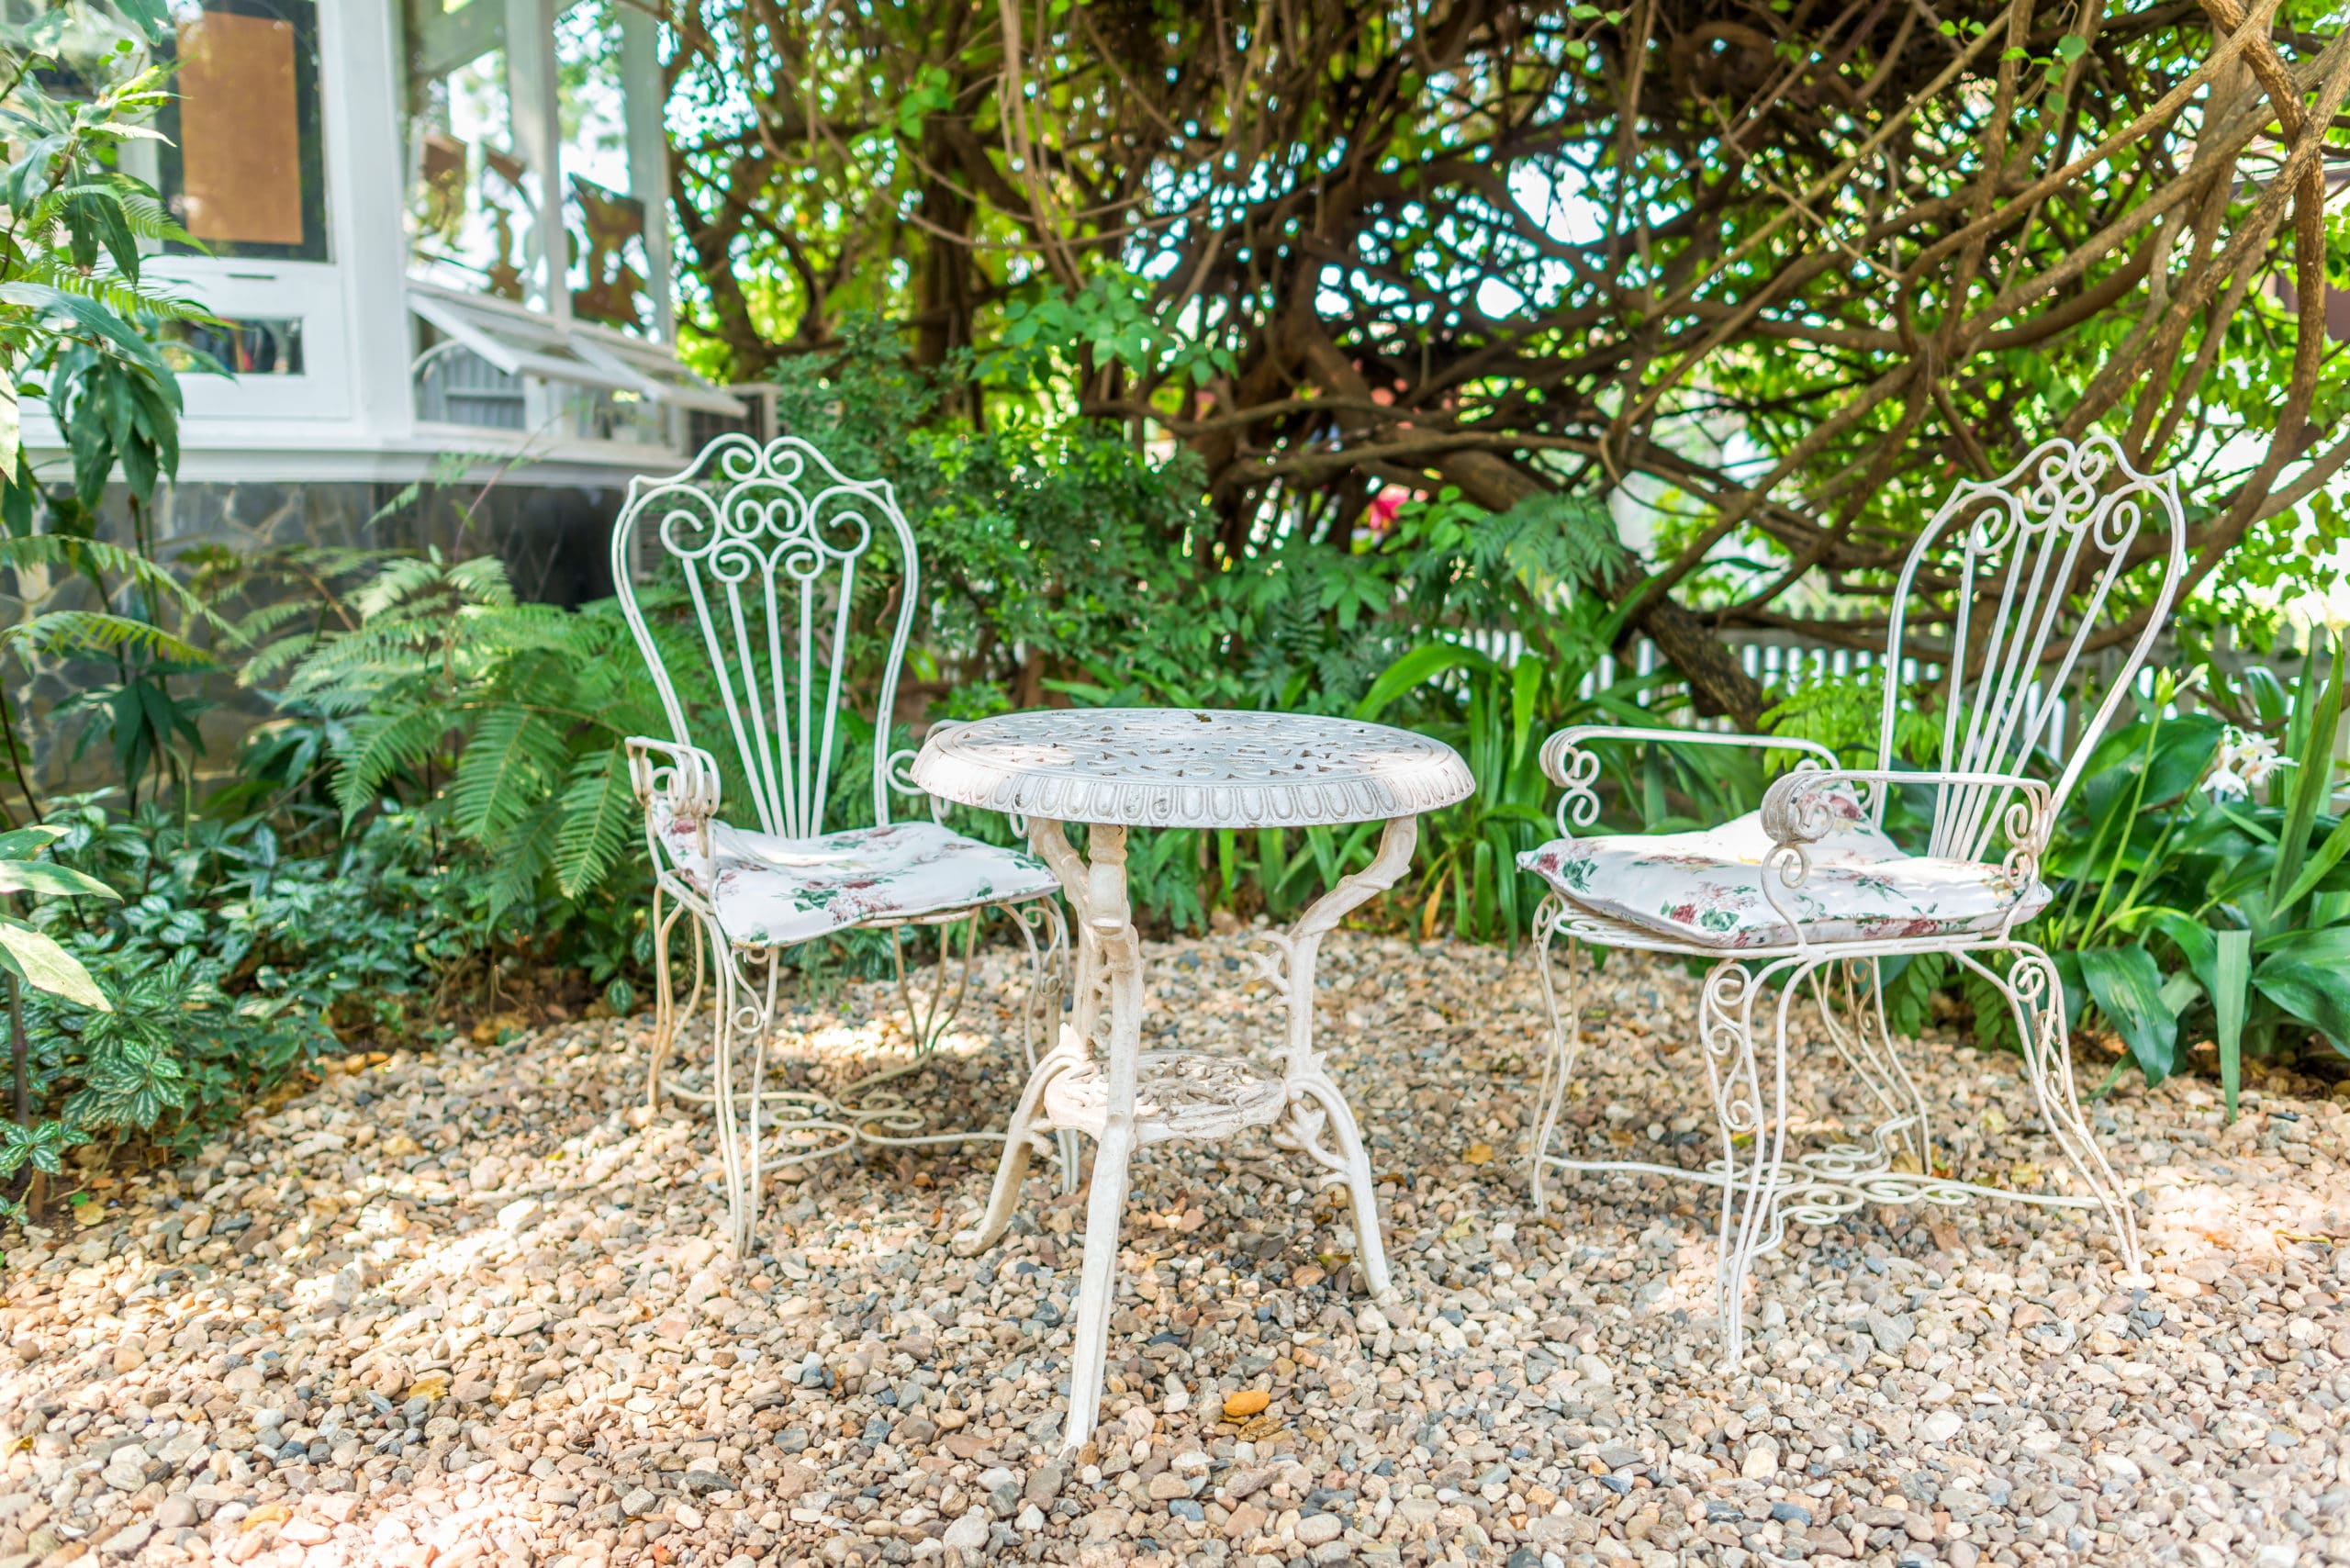 How To Paint Wrought Iron Patio Furniture (LIKE A PRO!)